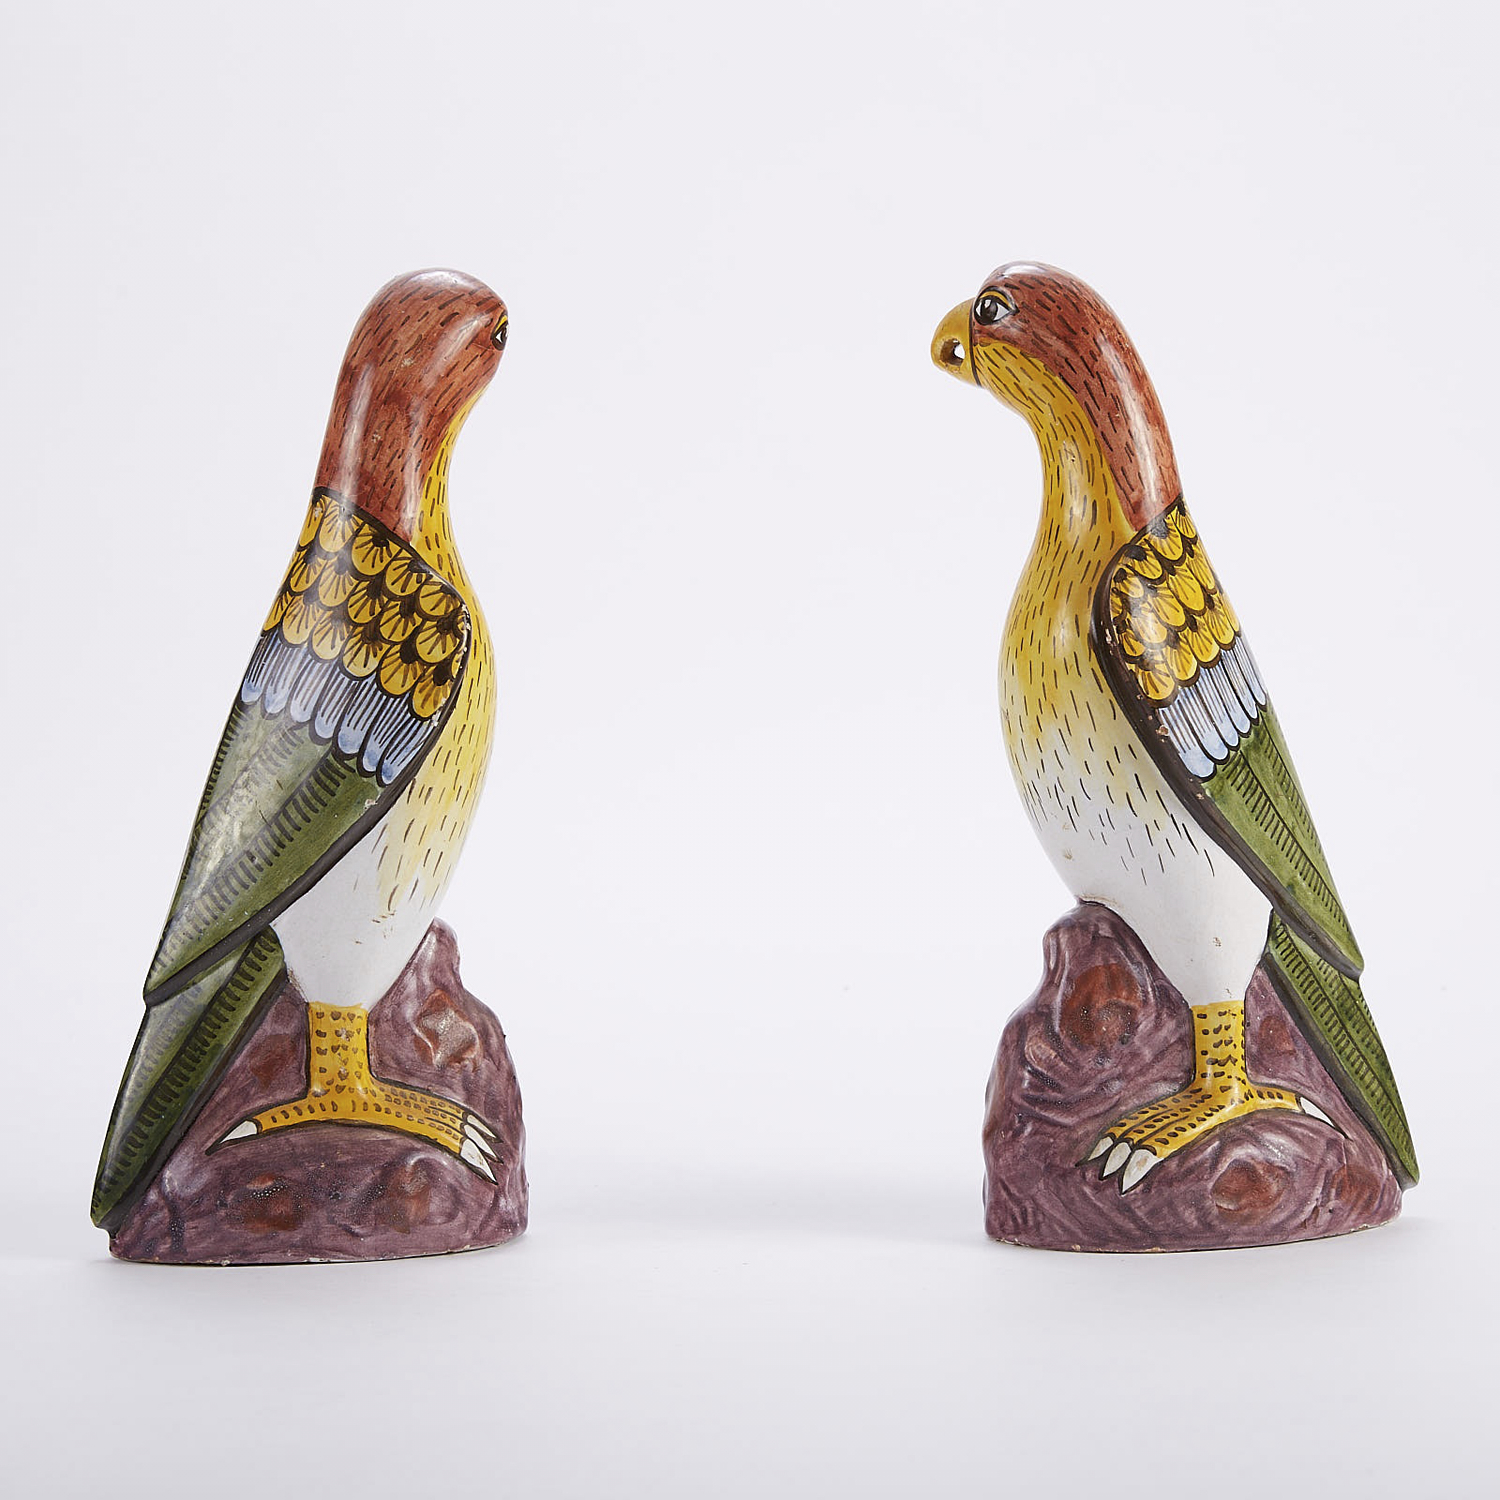 Pair of Faience Tin Glazed Ceramic Parrots - Image 2 of 4